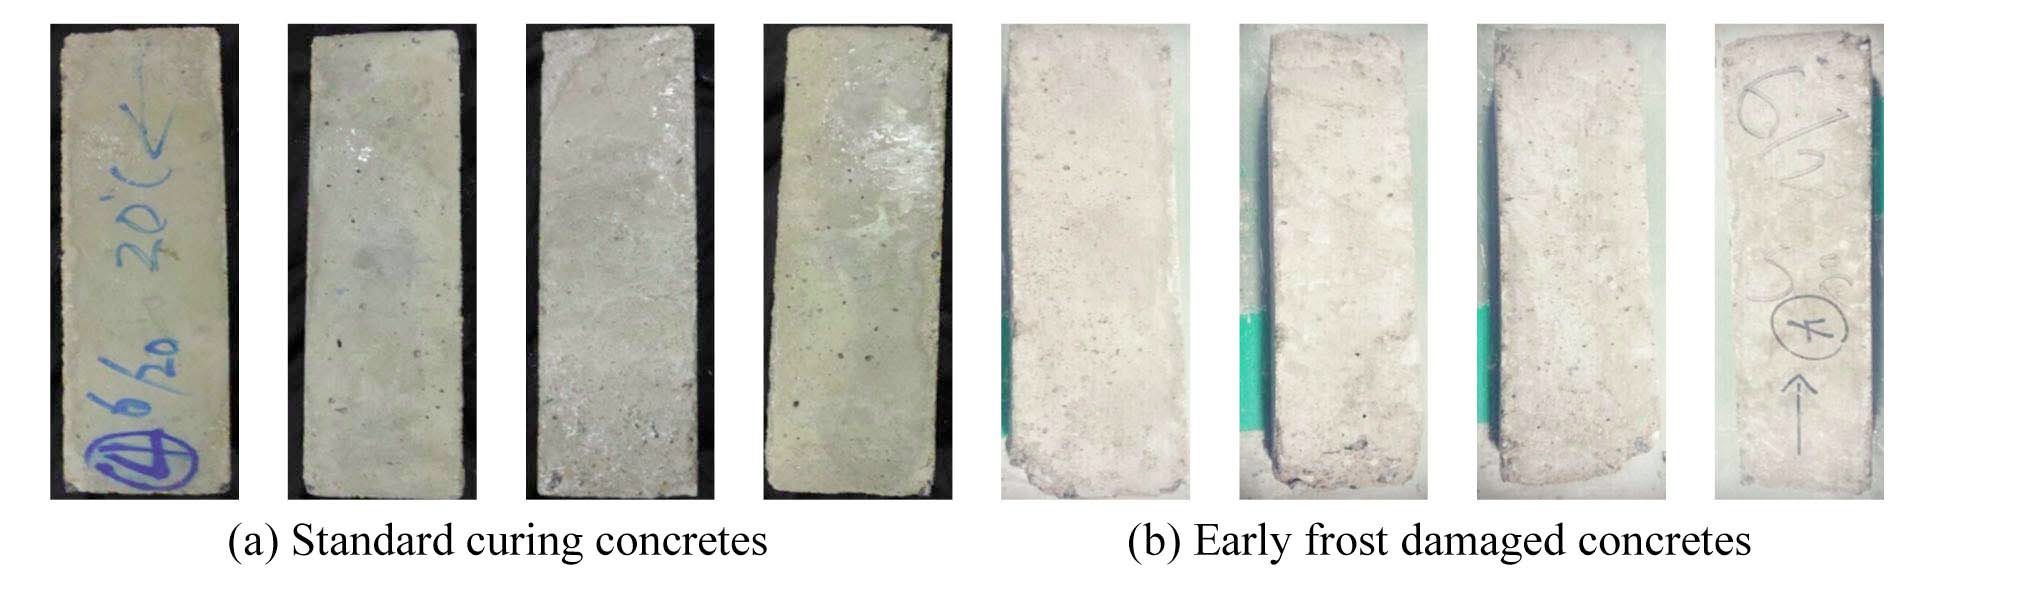 Appearance of Concretes after Completion of Freeze-thaw test